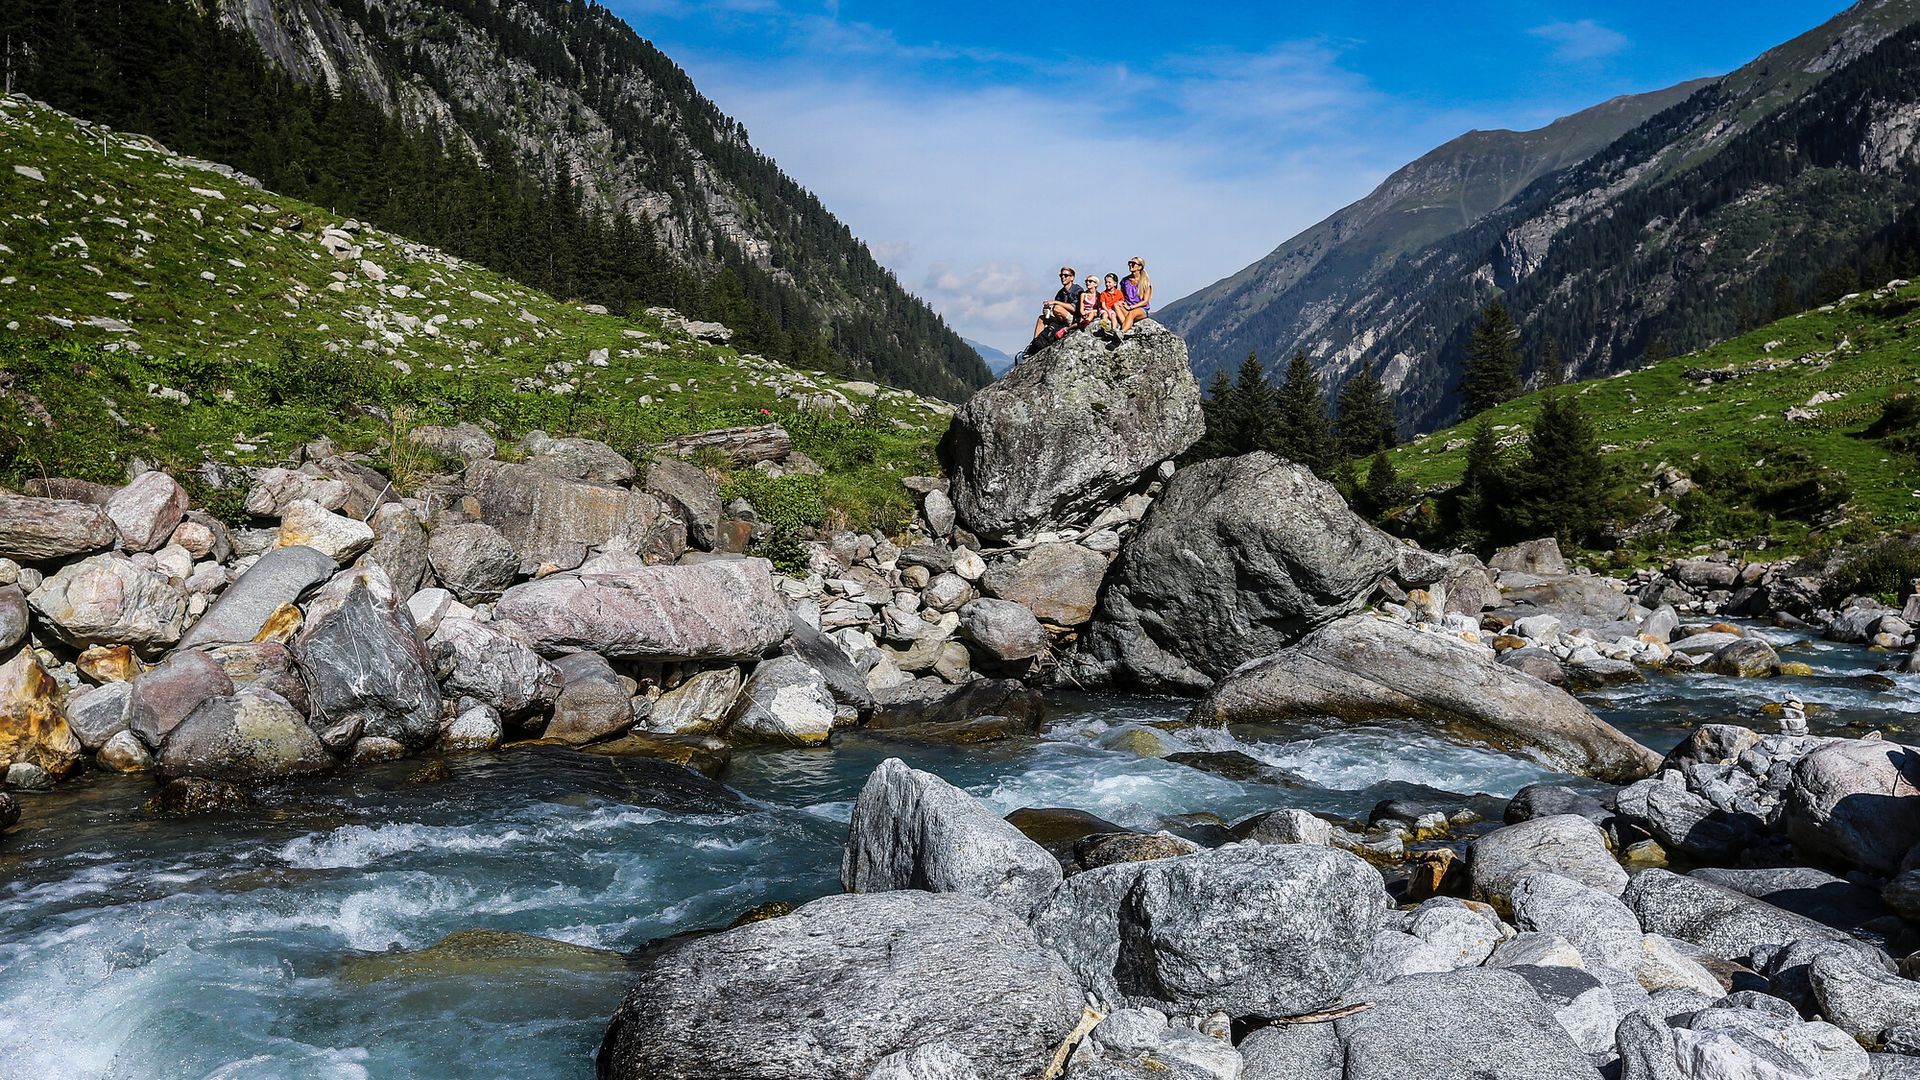 The family enjoys the mountain view in the Stilluptal Valley.